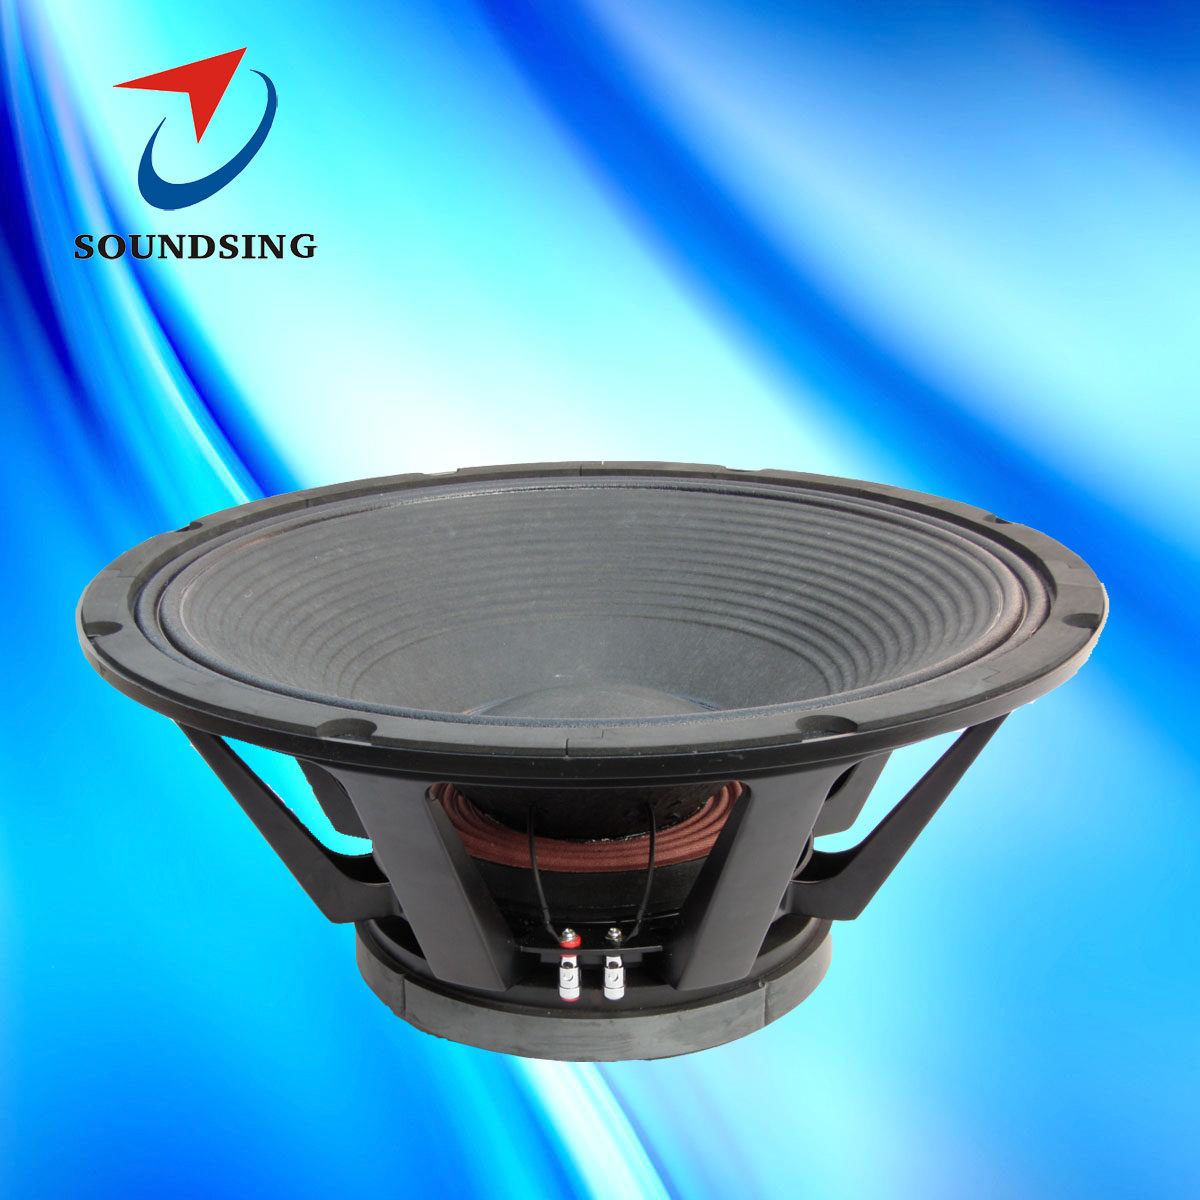 SD-21002A 21"subwoofer speakers